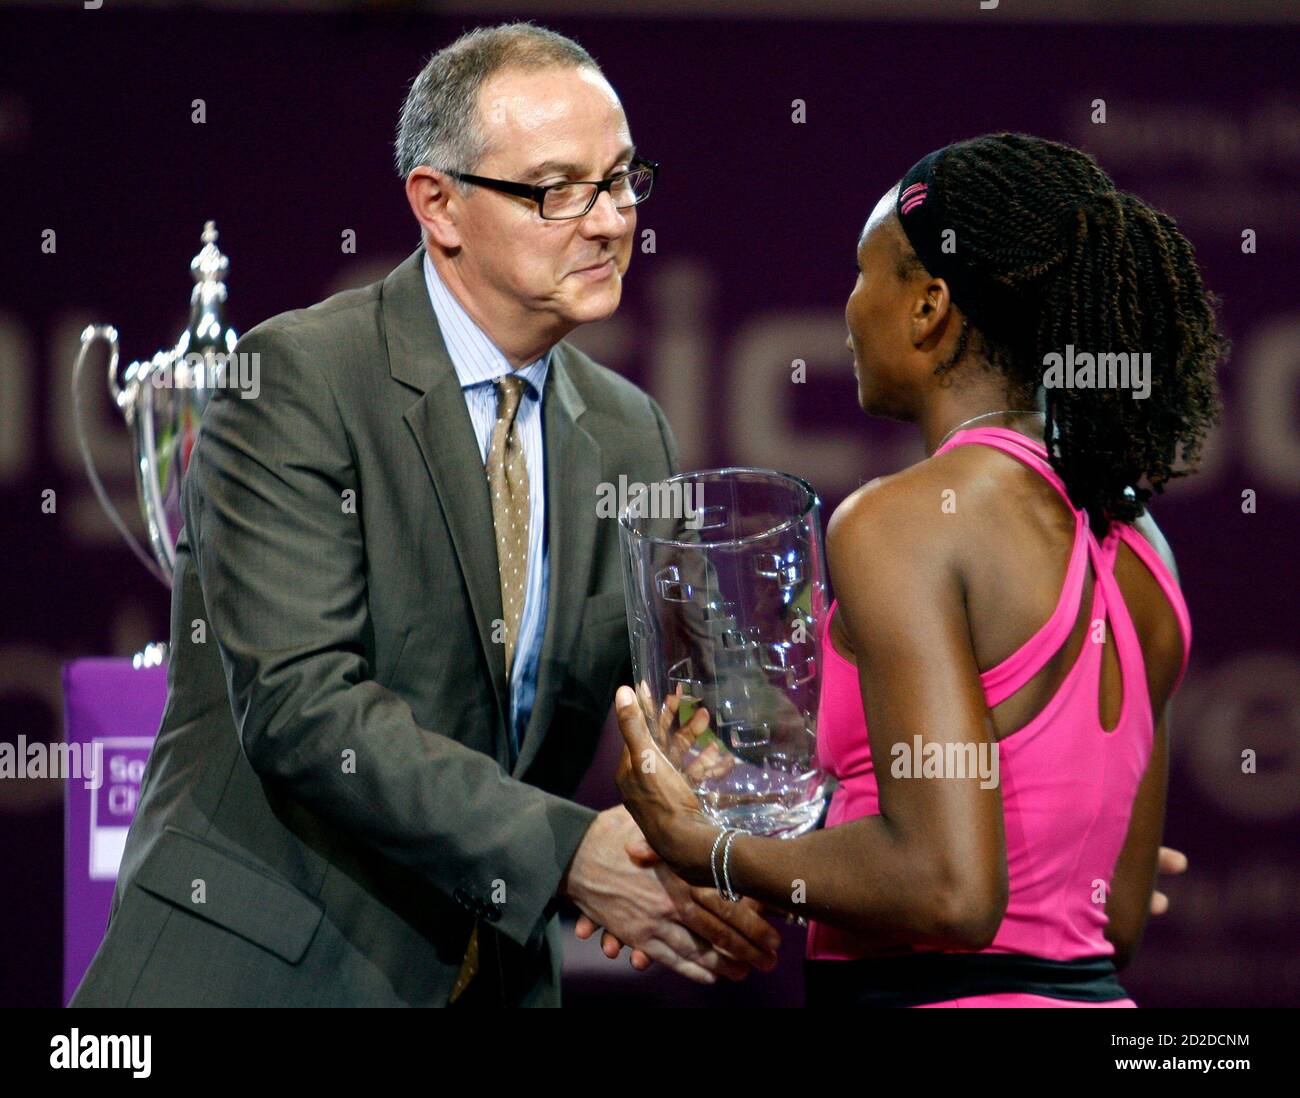 Venus Williams of the U.S. receives the runner-up trophy from Aldo Liguori  of Sony Ericsson after the WTA Tour Championships final tennis match  against her sister Serena Williams, in Doha November 1,